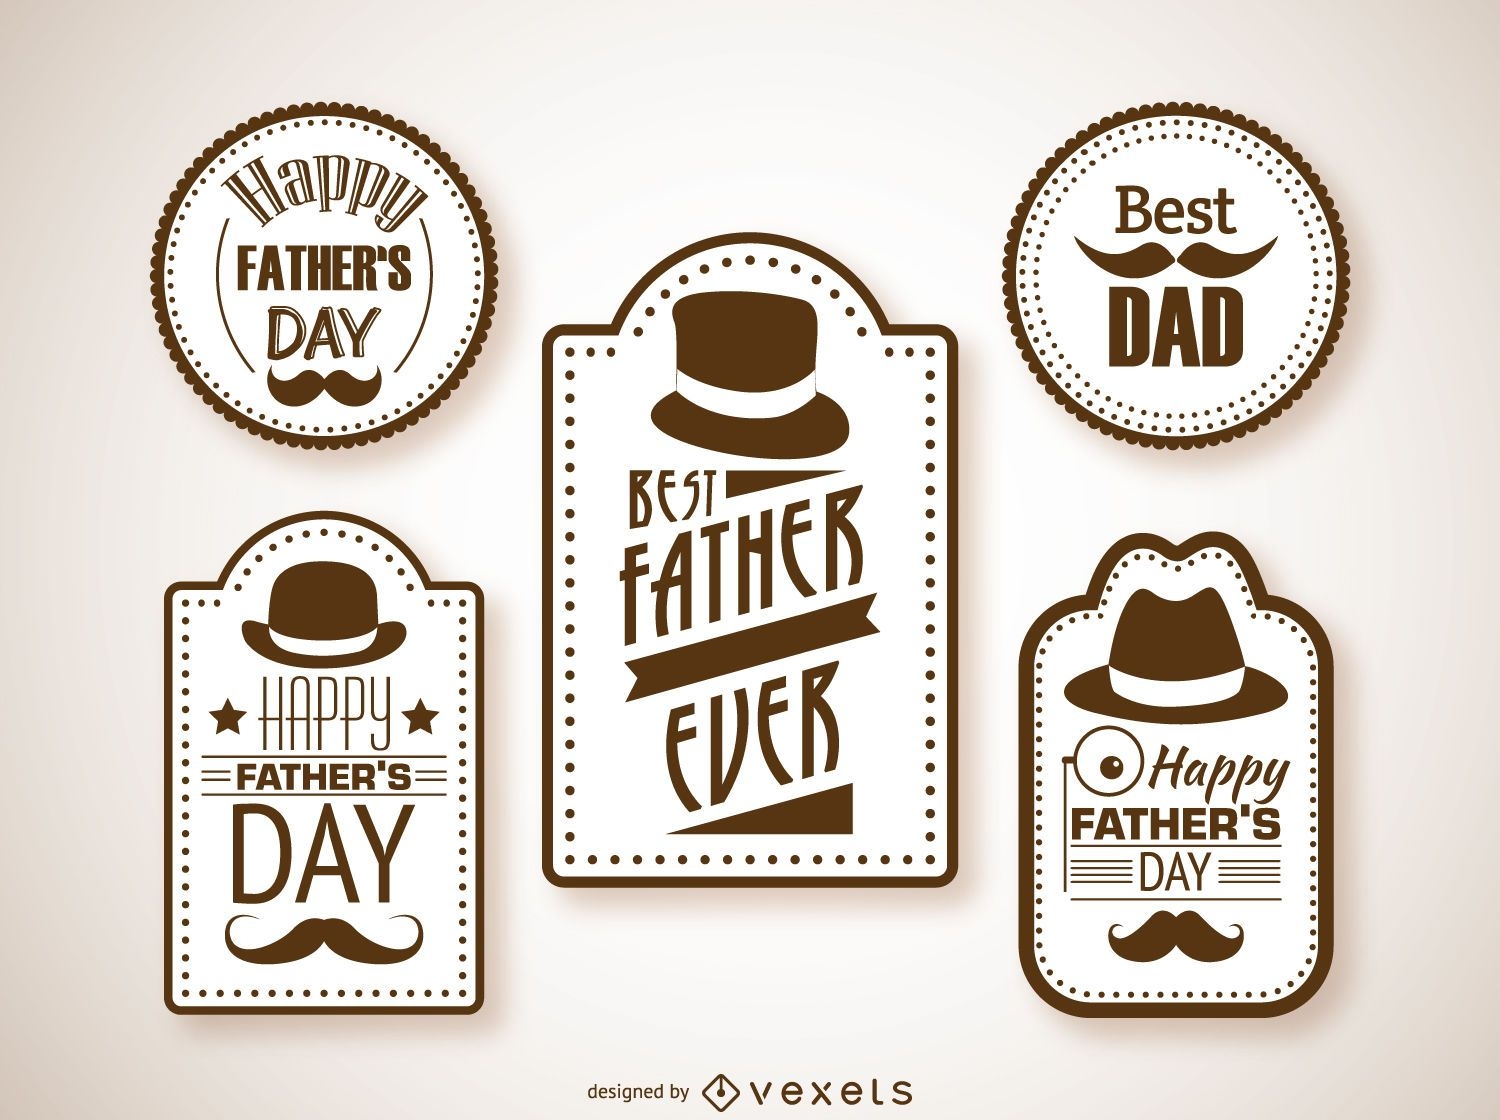 Download Hipster father's day labels - Vector download